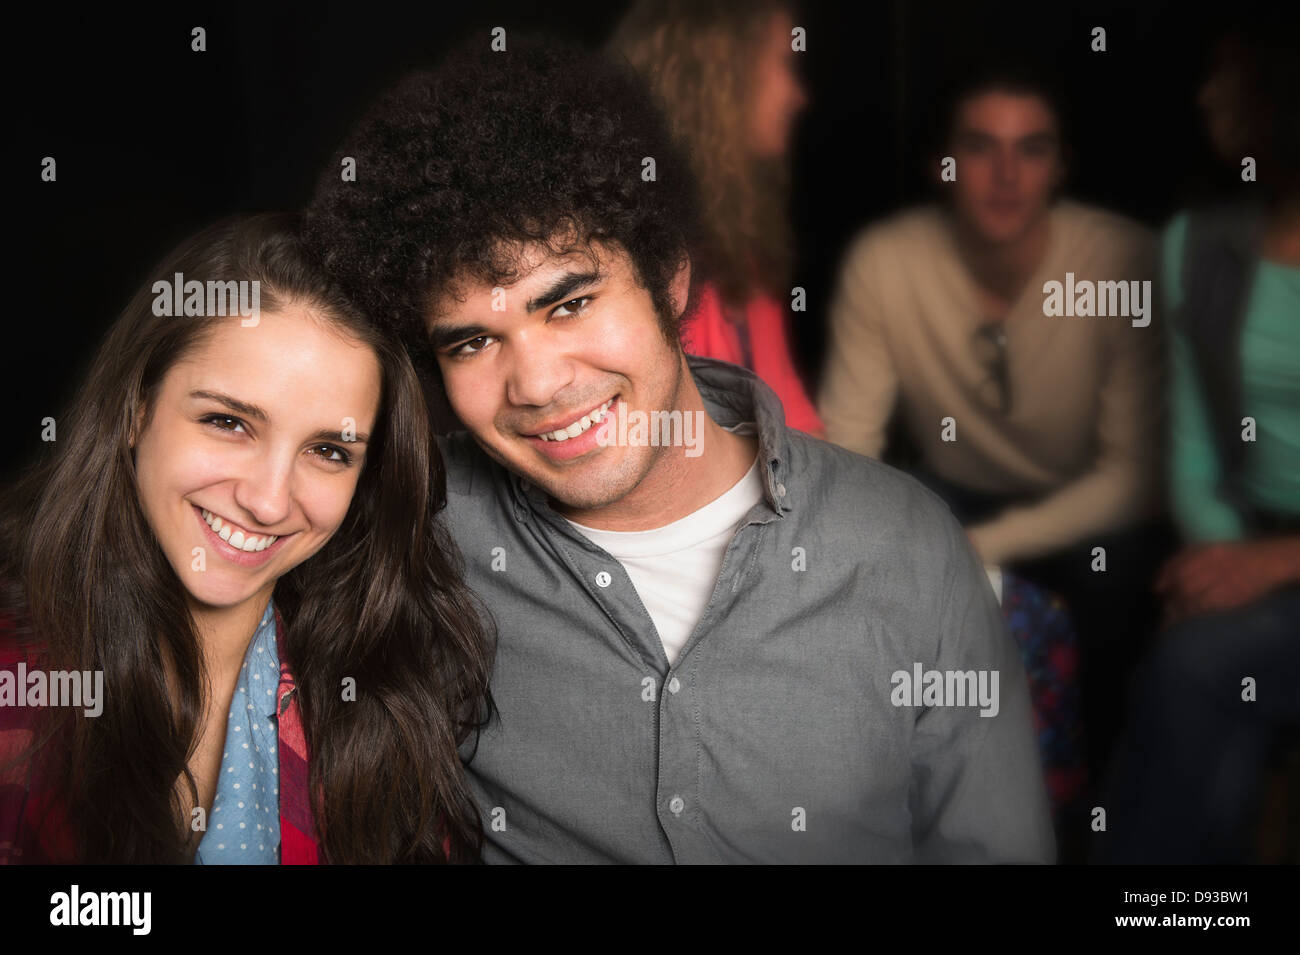 Couple smiling together Banque D'Images